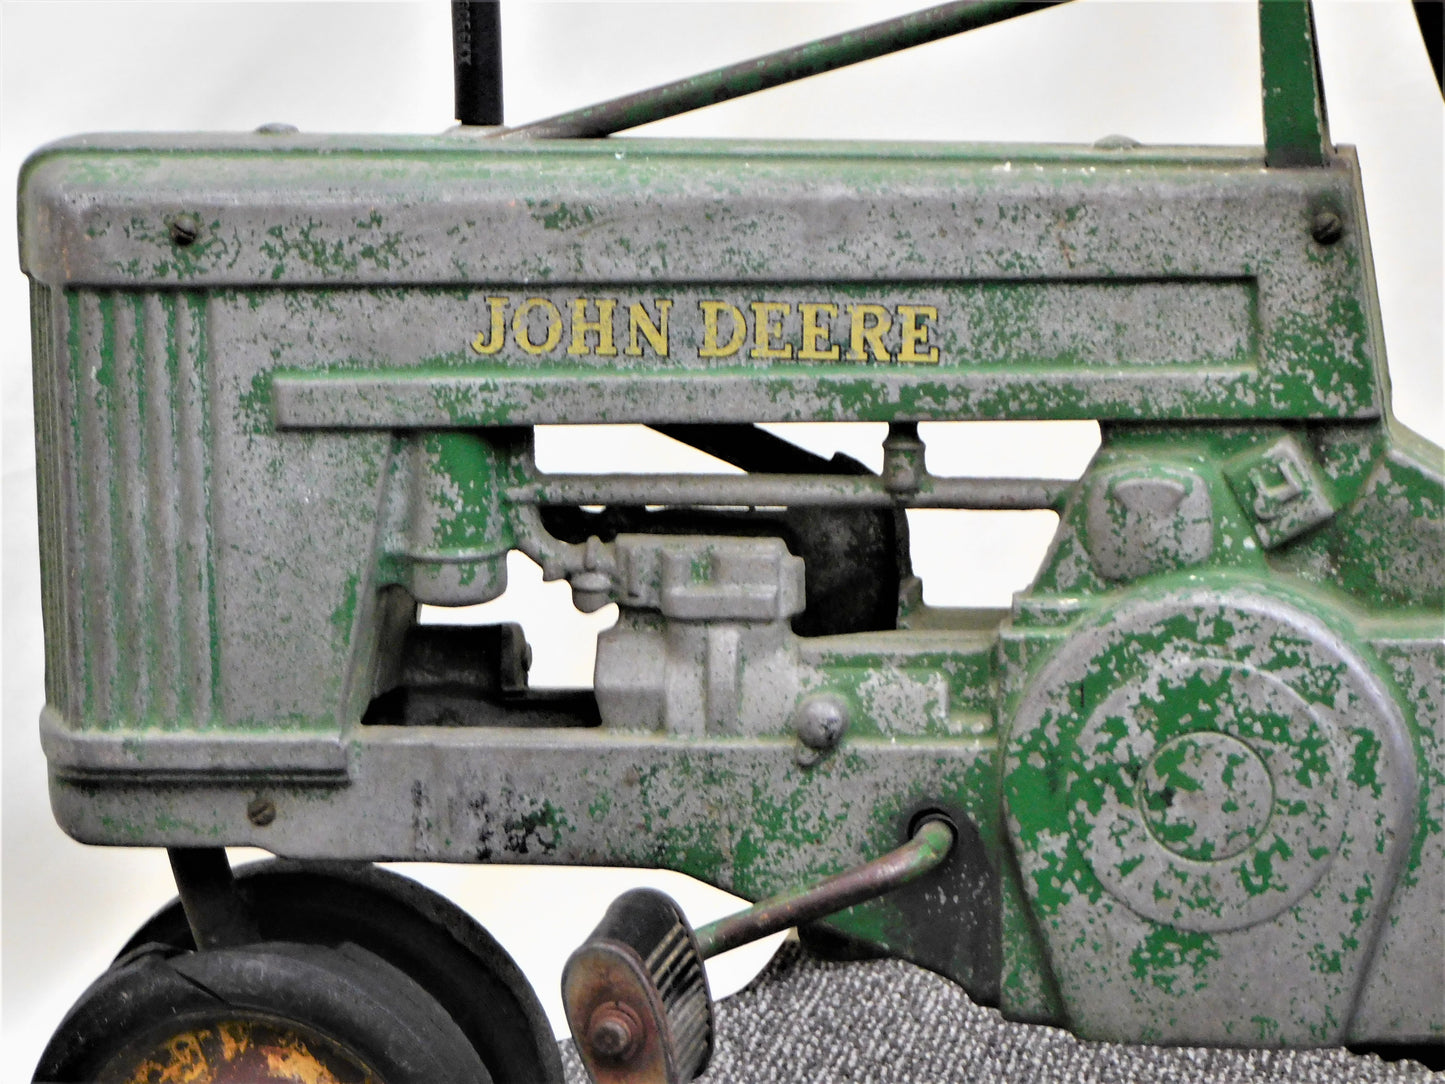 1952 John Deere Small 60 Pedal Tractor